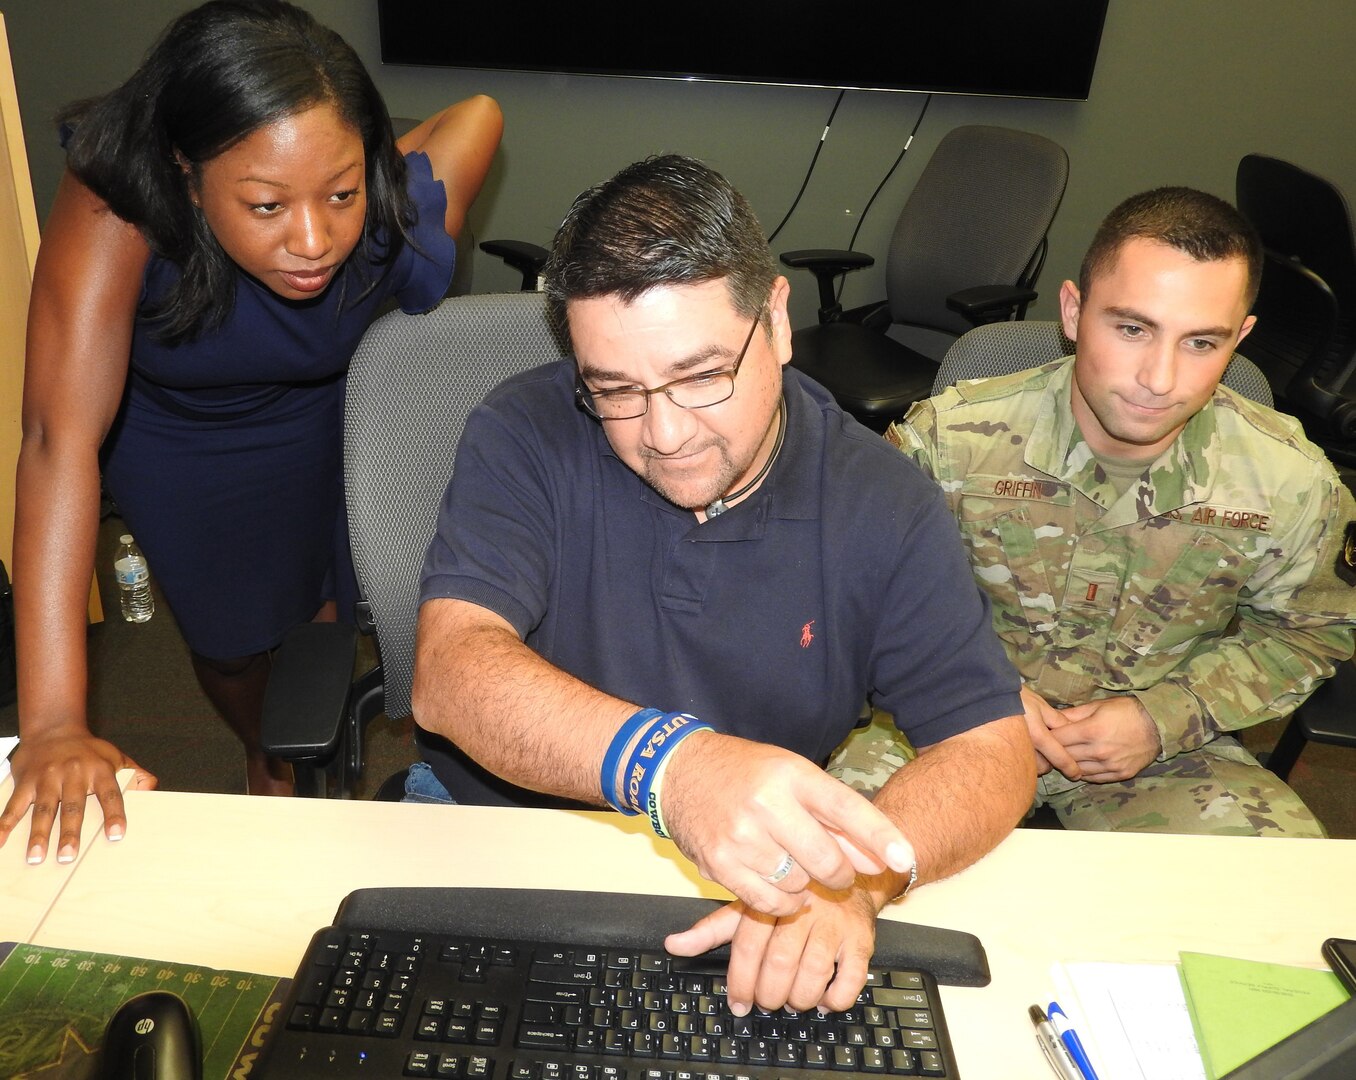 As 30 budget analysts and financial experts gathered at Air Force Installation and Mission Support Center headquarters at Joint Base San Antonio-Lackland to close out the fiscal year, 2nd Lt. Paul Griffin and Emerald Lundy, budget officers from Hanscom Air Force Base, Massachusetts, received a behind the scenes look at AFIMSC and end of year operations from Felix Saenz, AFIMSC budget analyst.